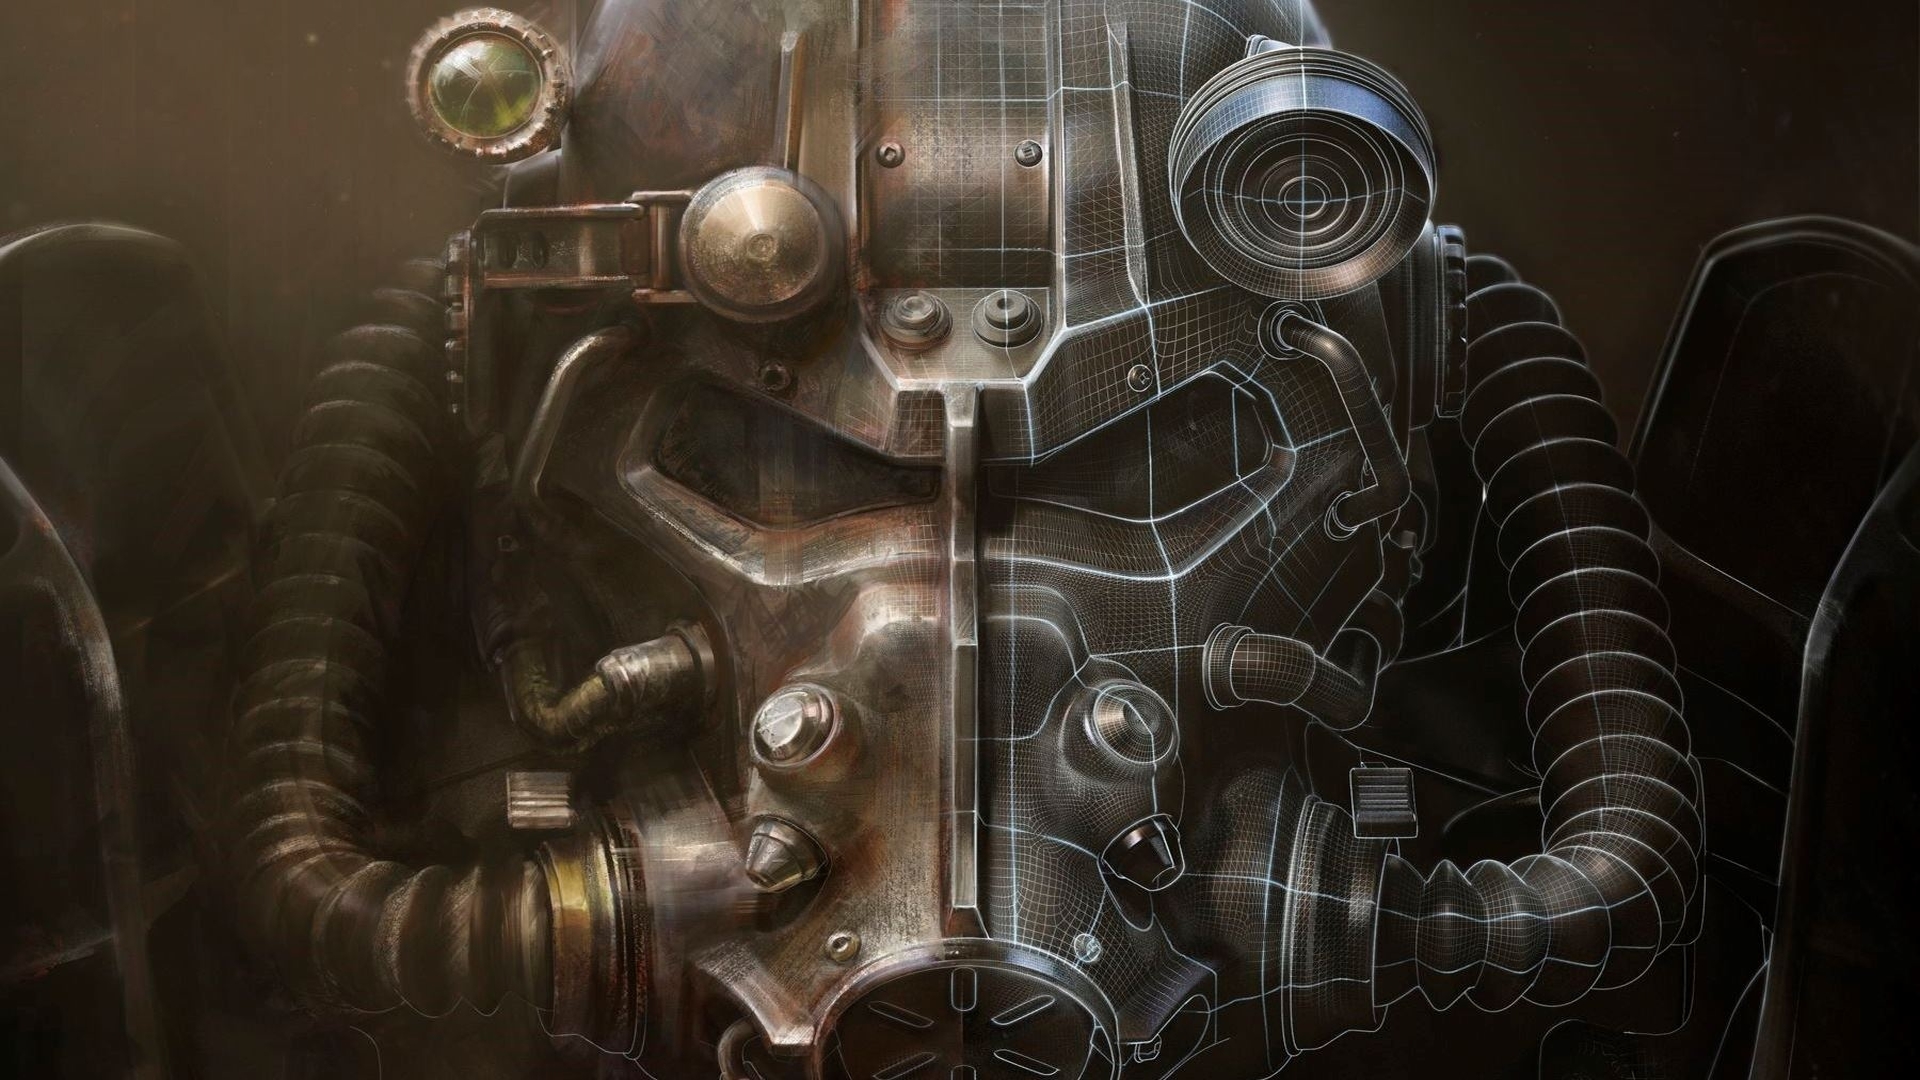 Wallpaper Fallout Bethesda Softworks Armor Full